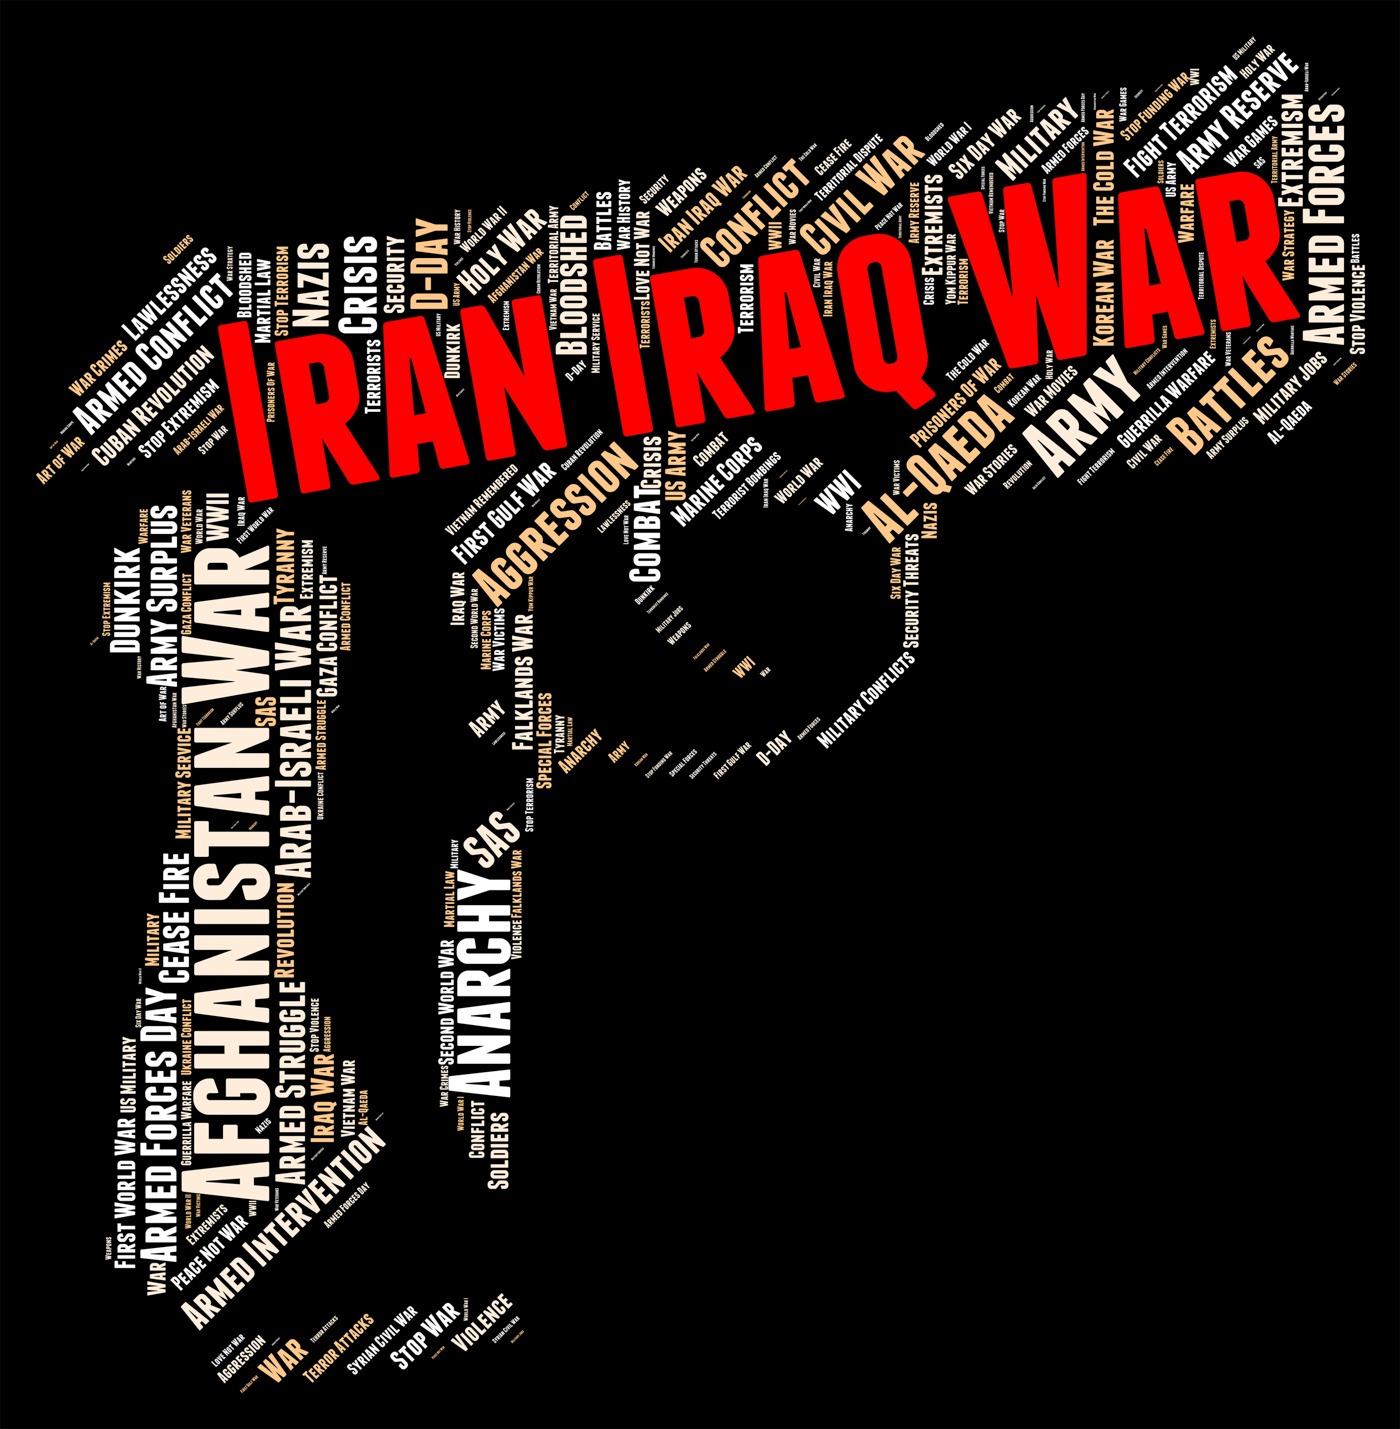 Iran Iraq War Shows Military Action And Battle, Battle, Islamic, Wordcloud, Word, HQ Photo